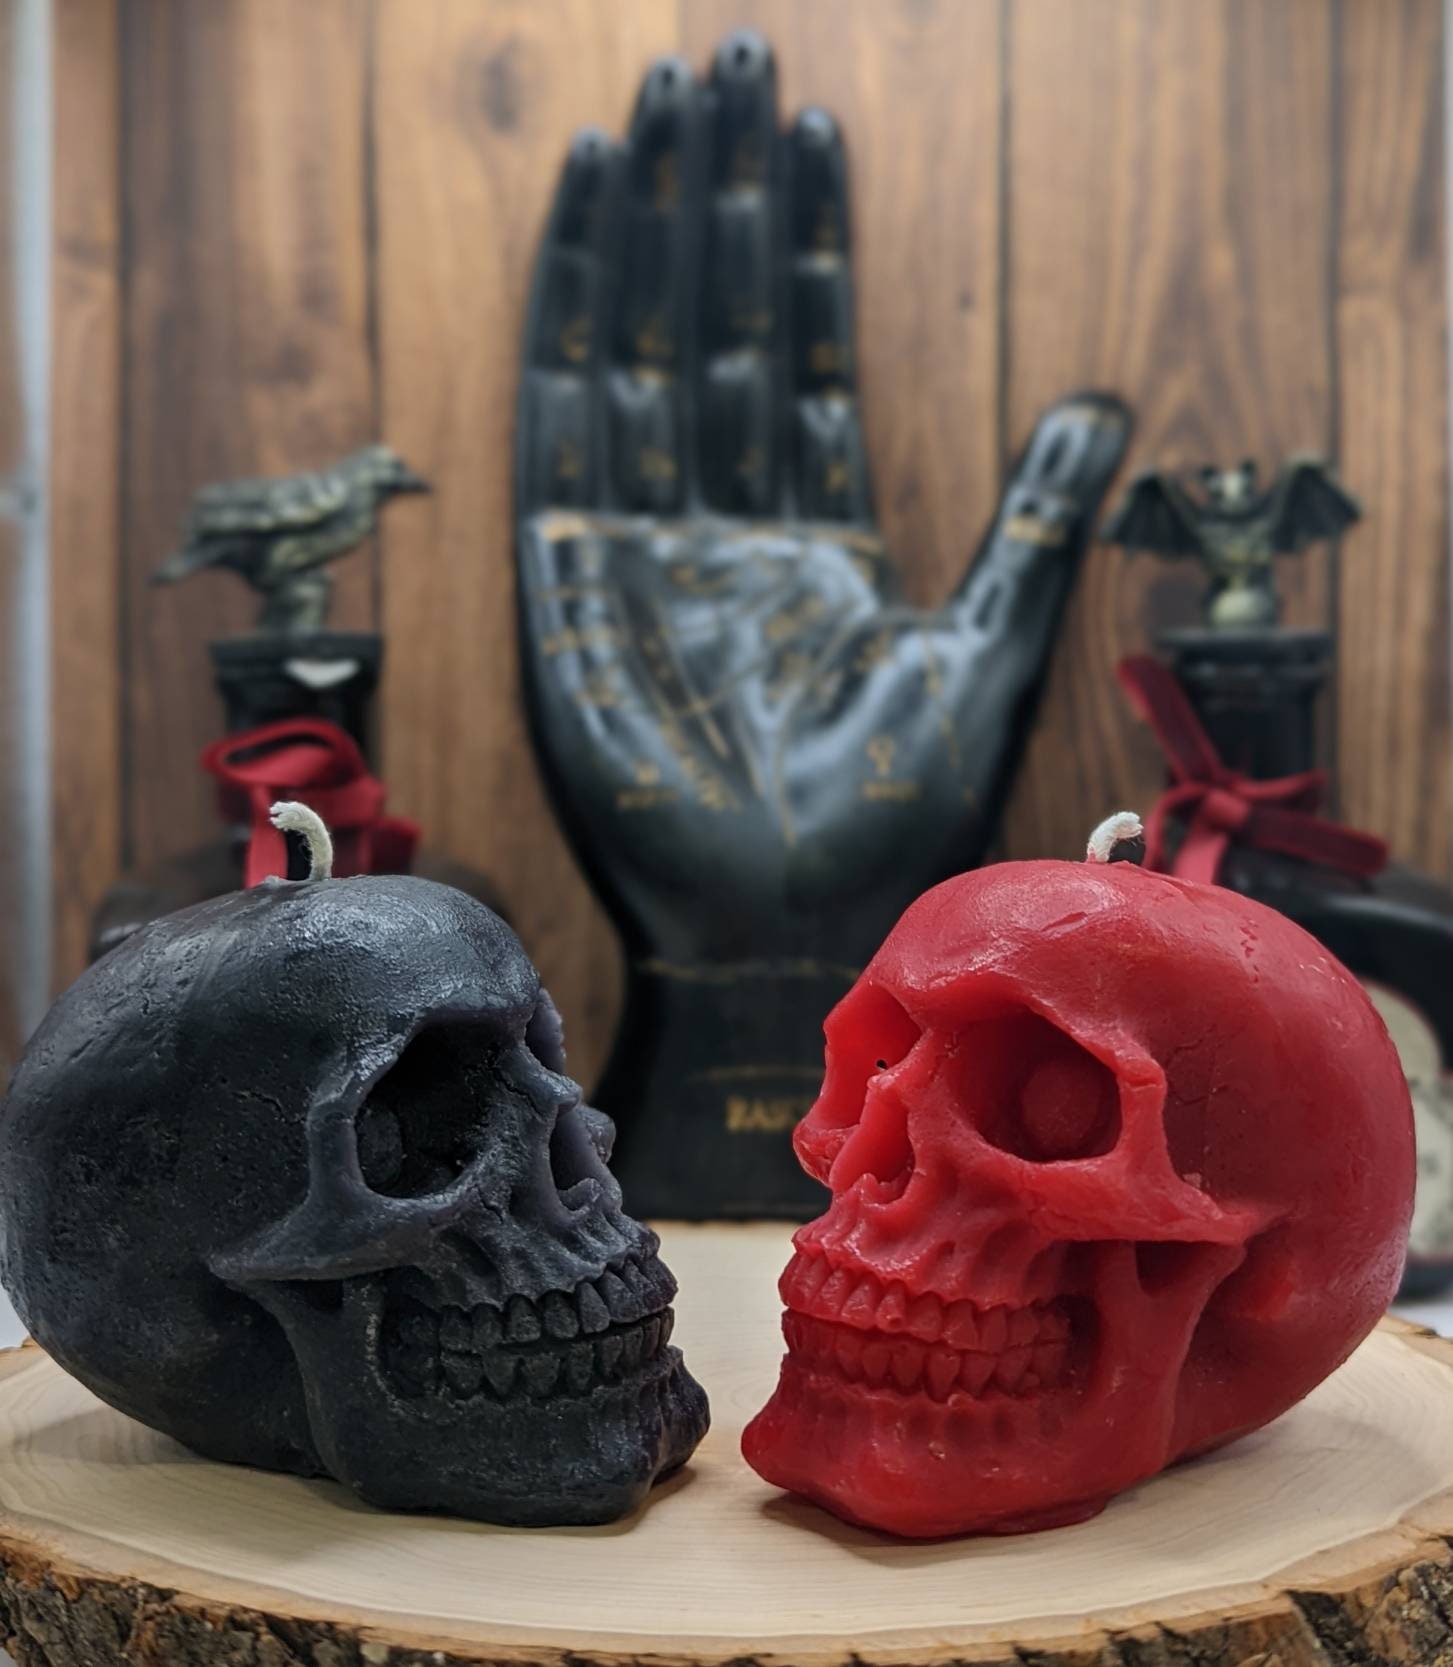 solacol Candle Decorations for Candle Making Silicone Halloween Skull  Candle Making Aromatherapy Soap Wax Resin Mould Candle Molds for Candle  Making